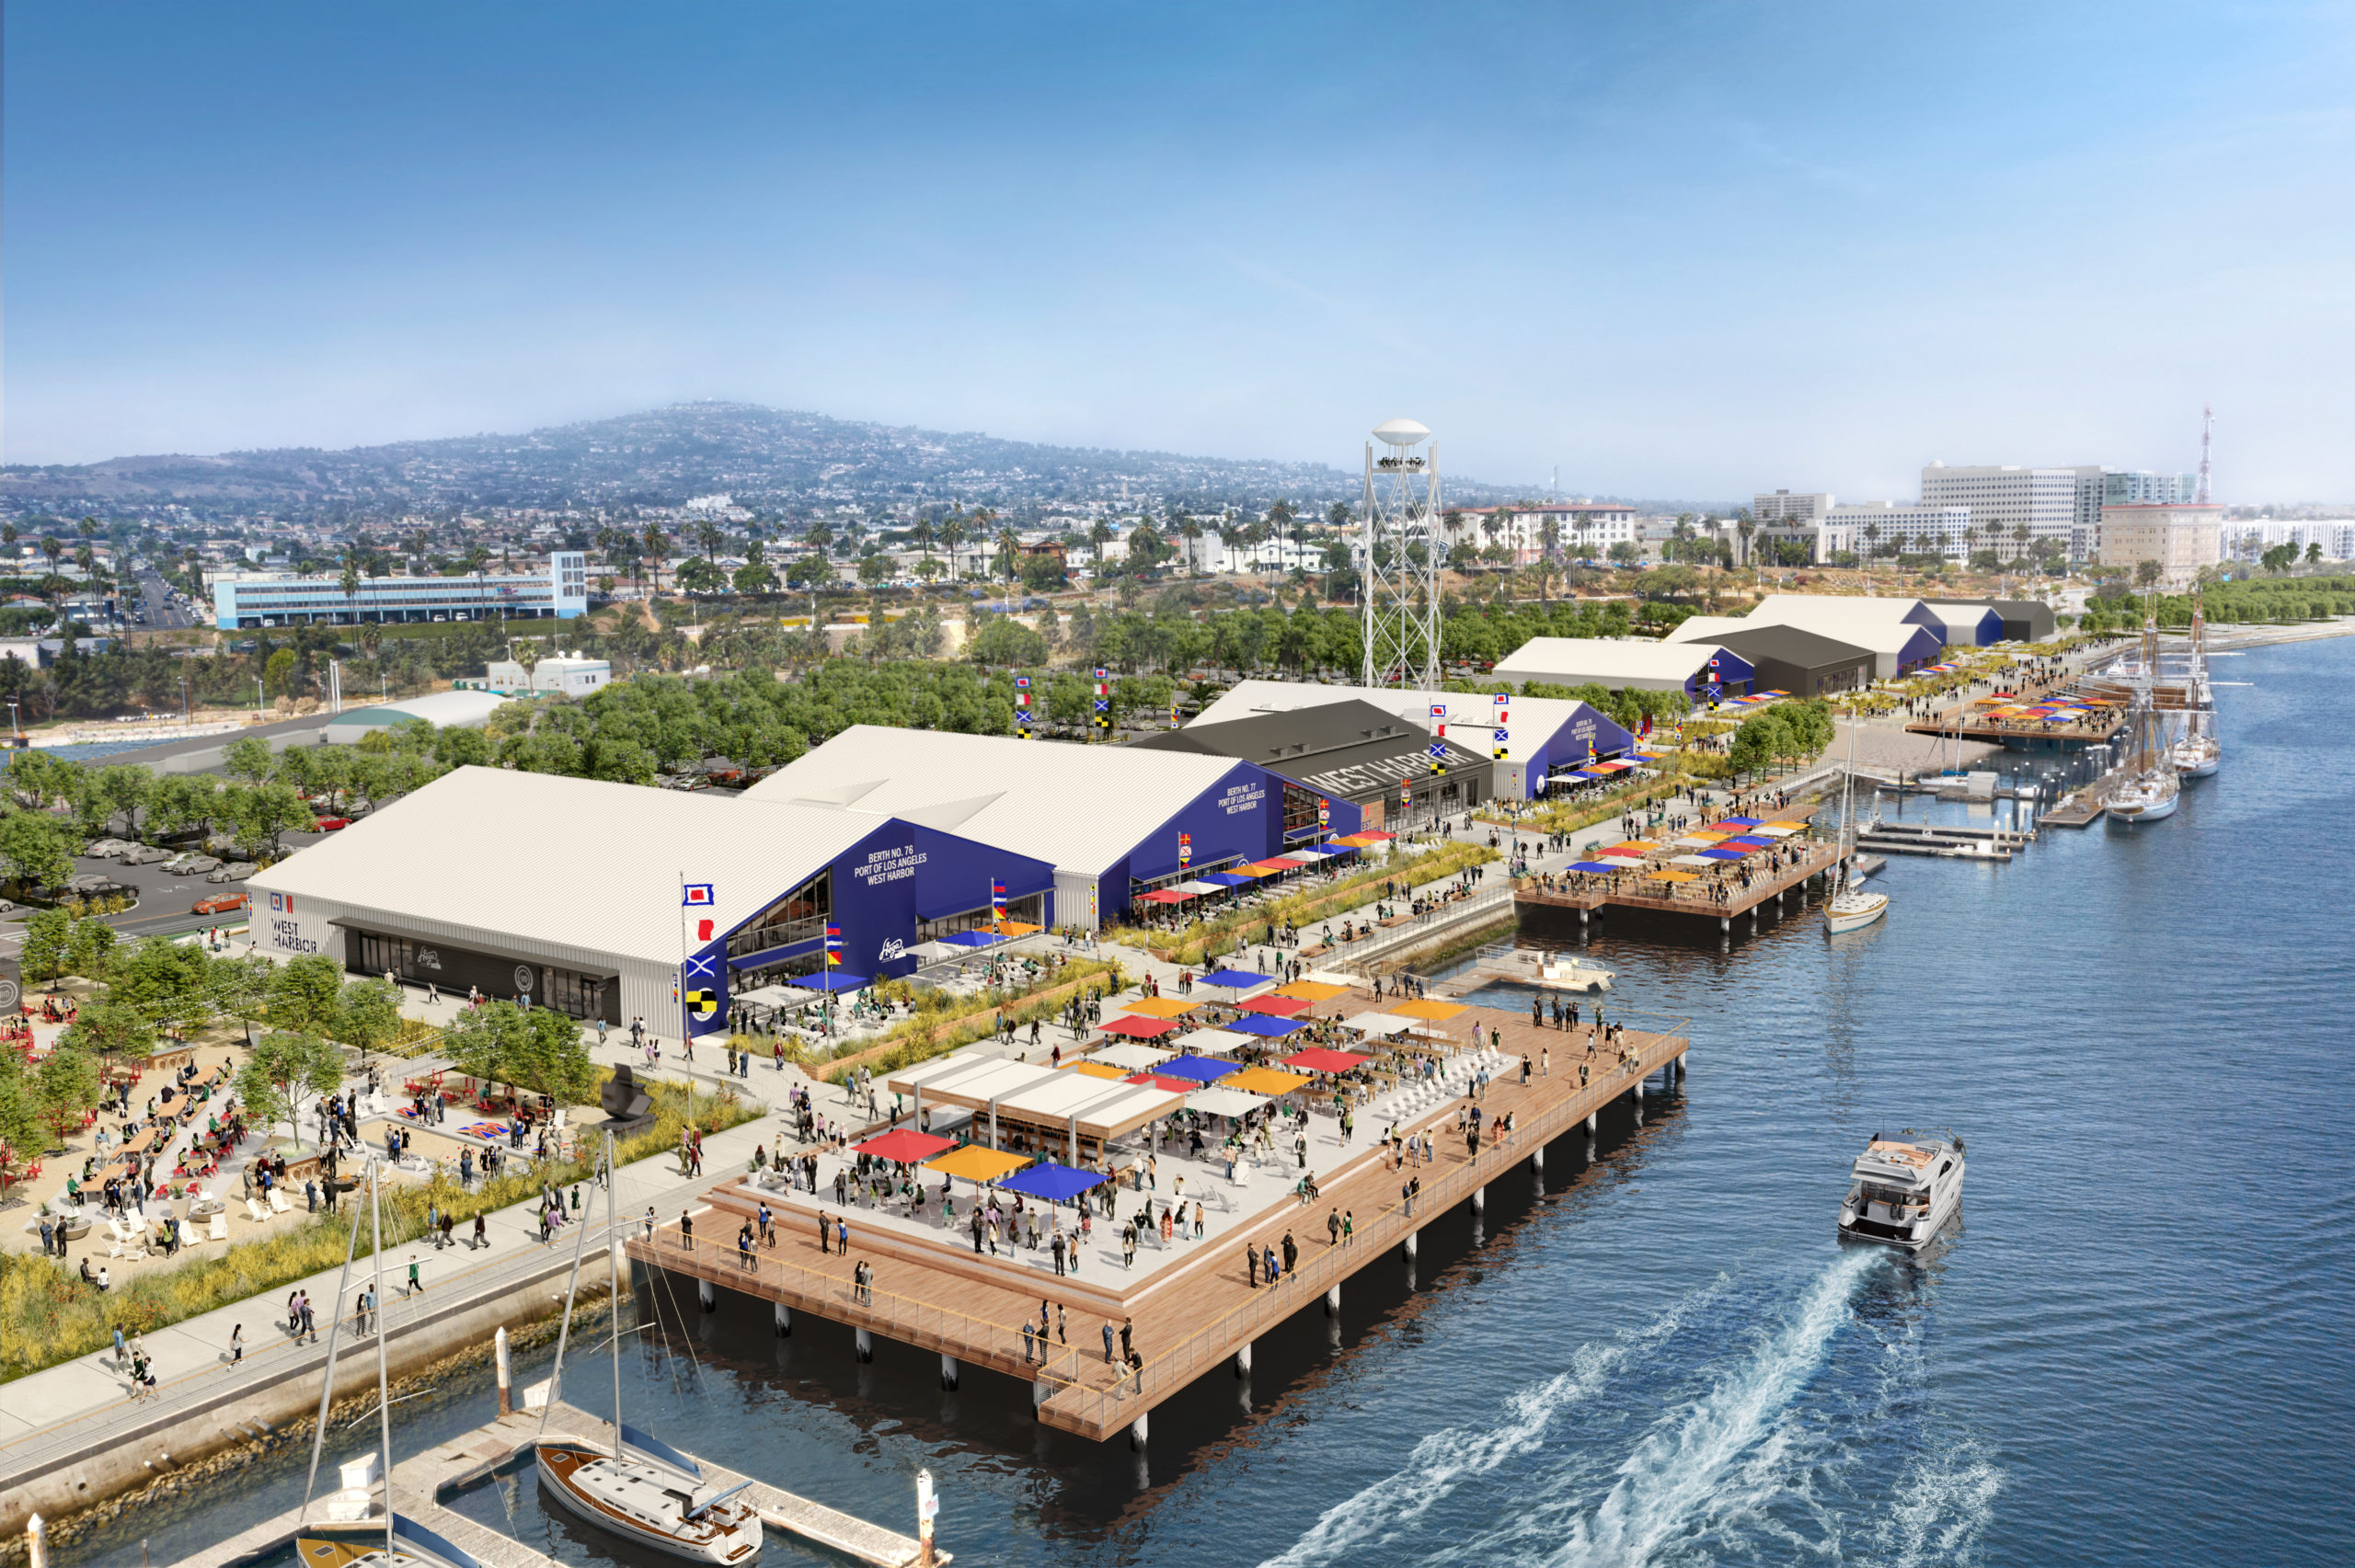 San Pedro’s Ports O’ Call was torn down. A new waterfront is finally taking shape